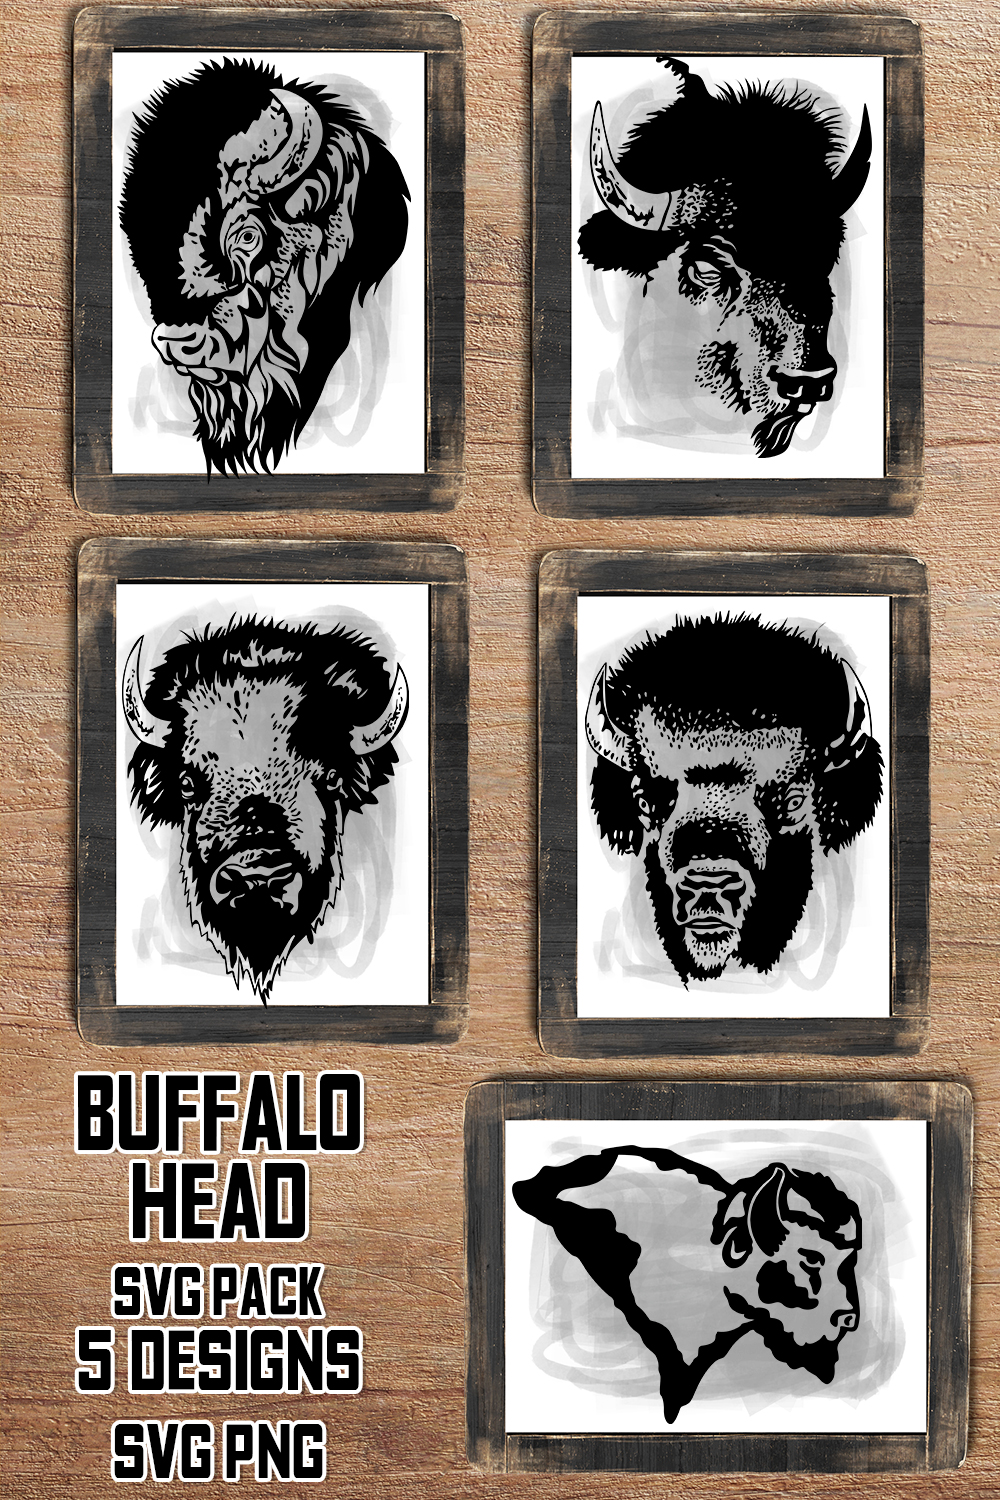 Set of four buffalo head coasters on a wooden surface.